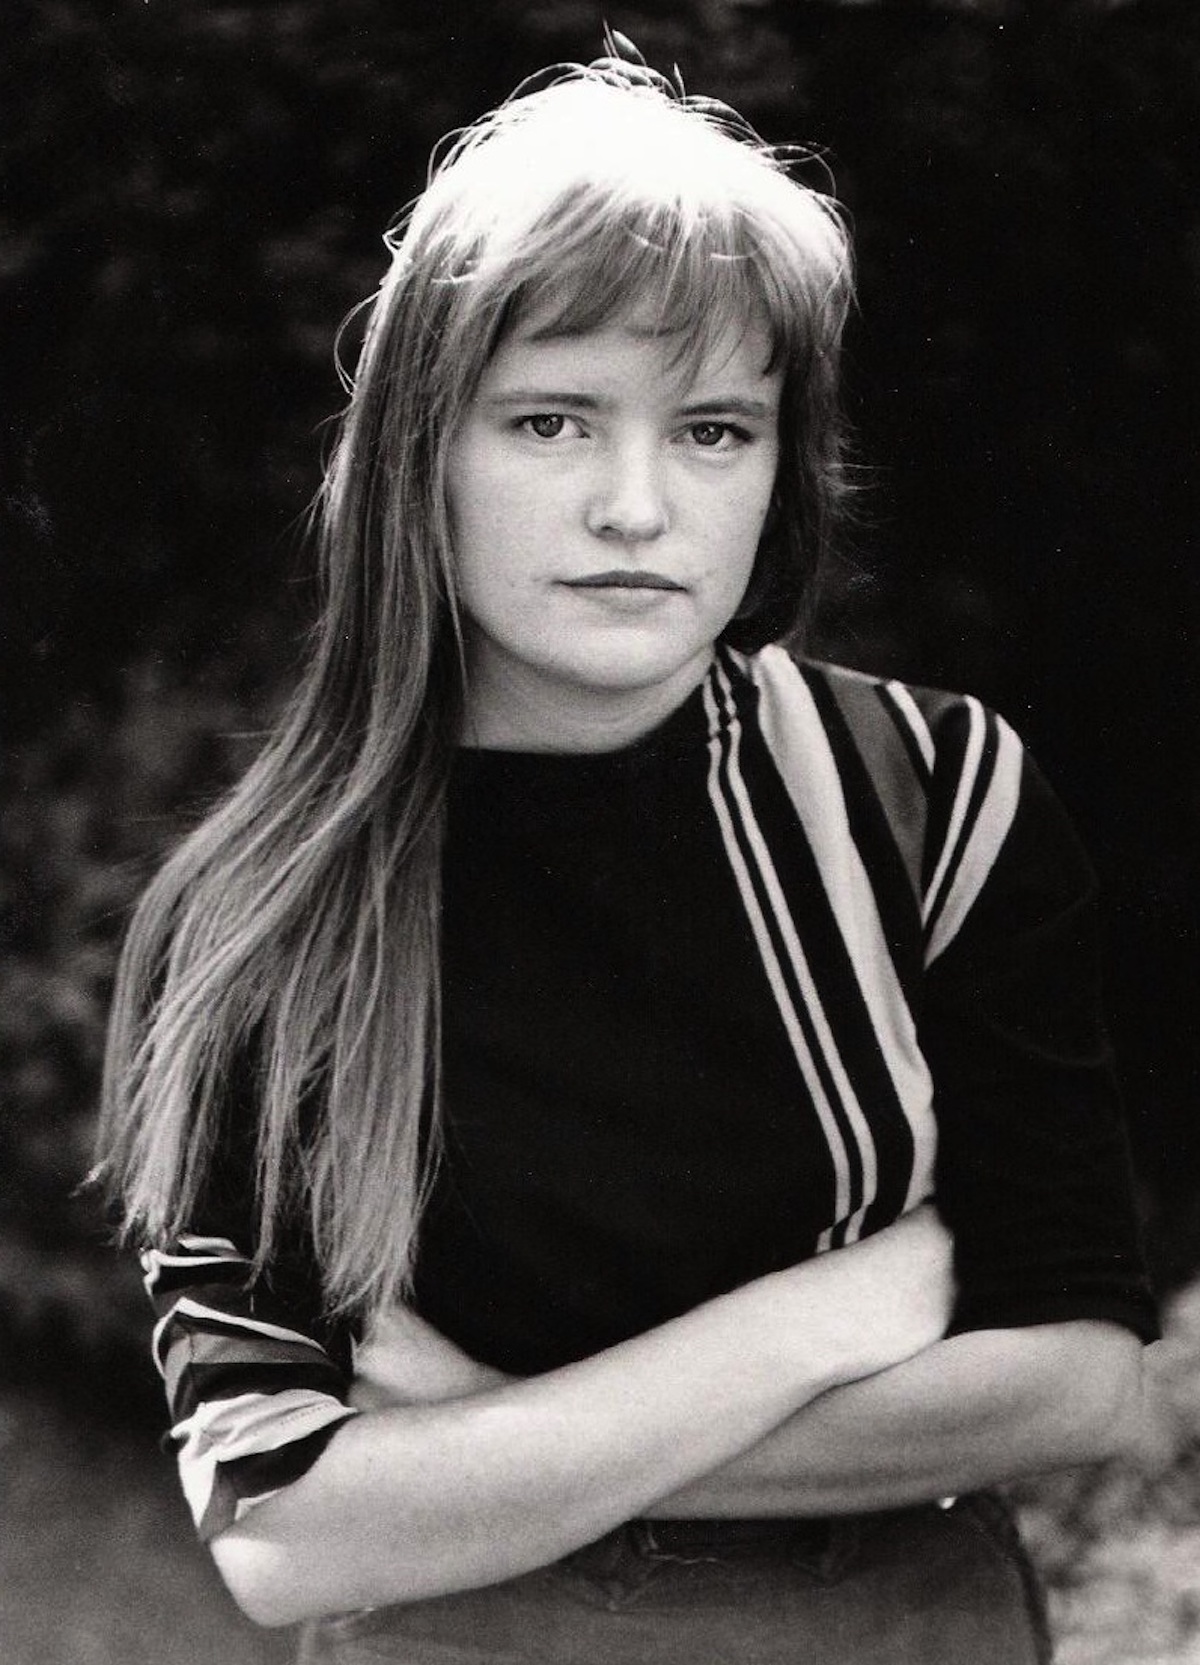 Susan at age 18. Photo courtesy of Susan Griffin.